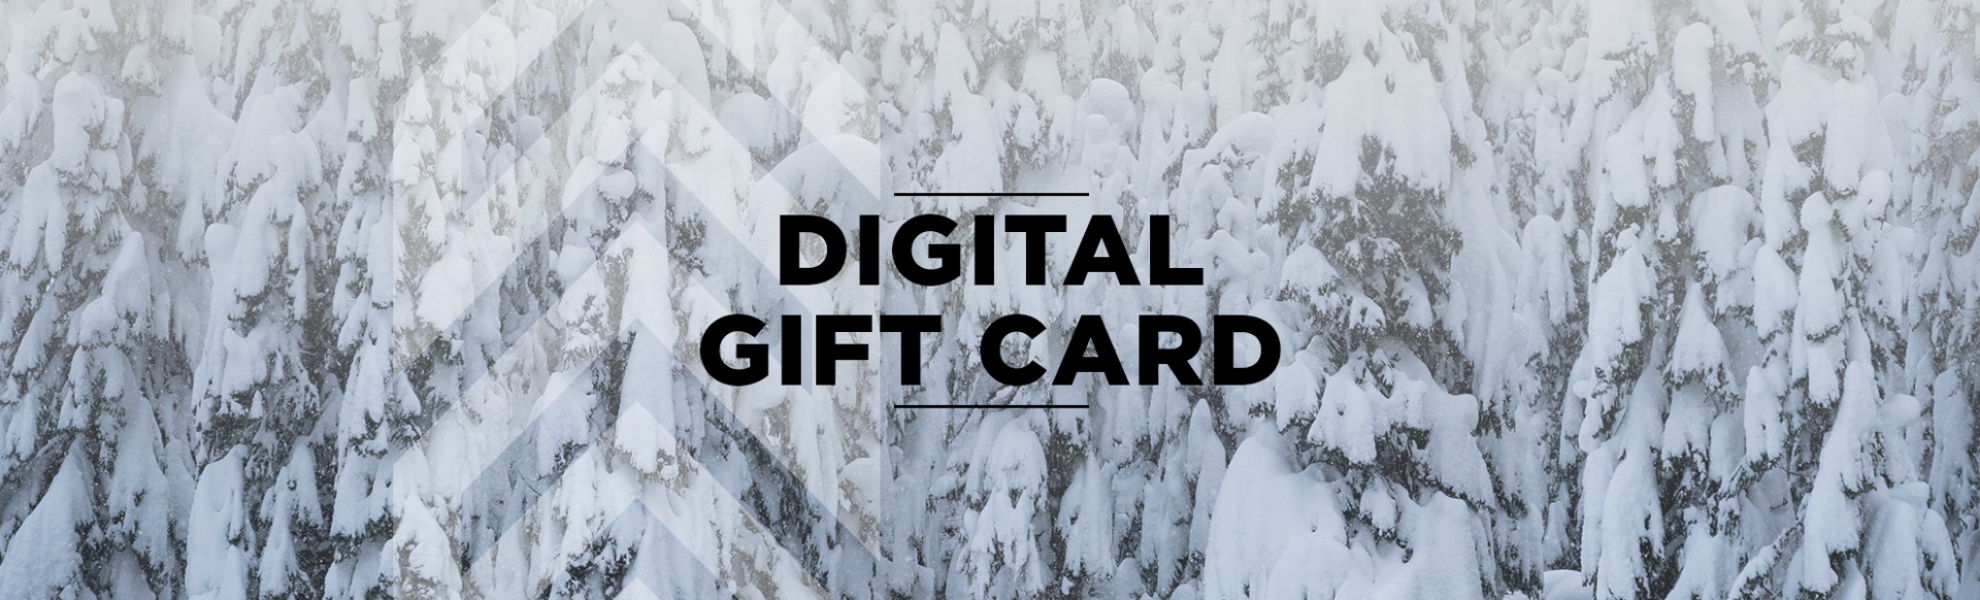 Picture of Digital Gift Card